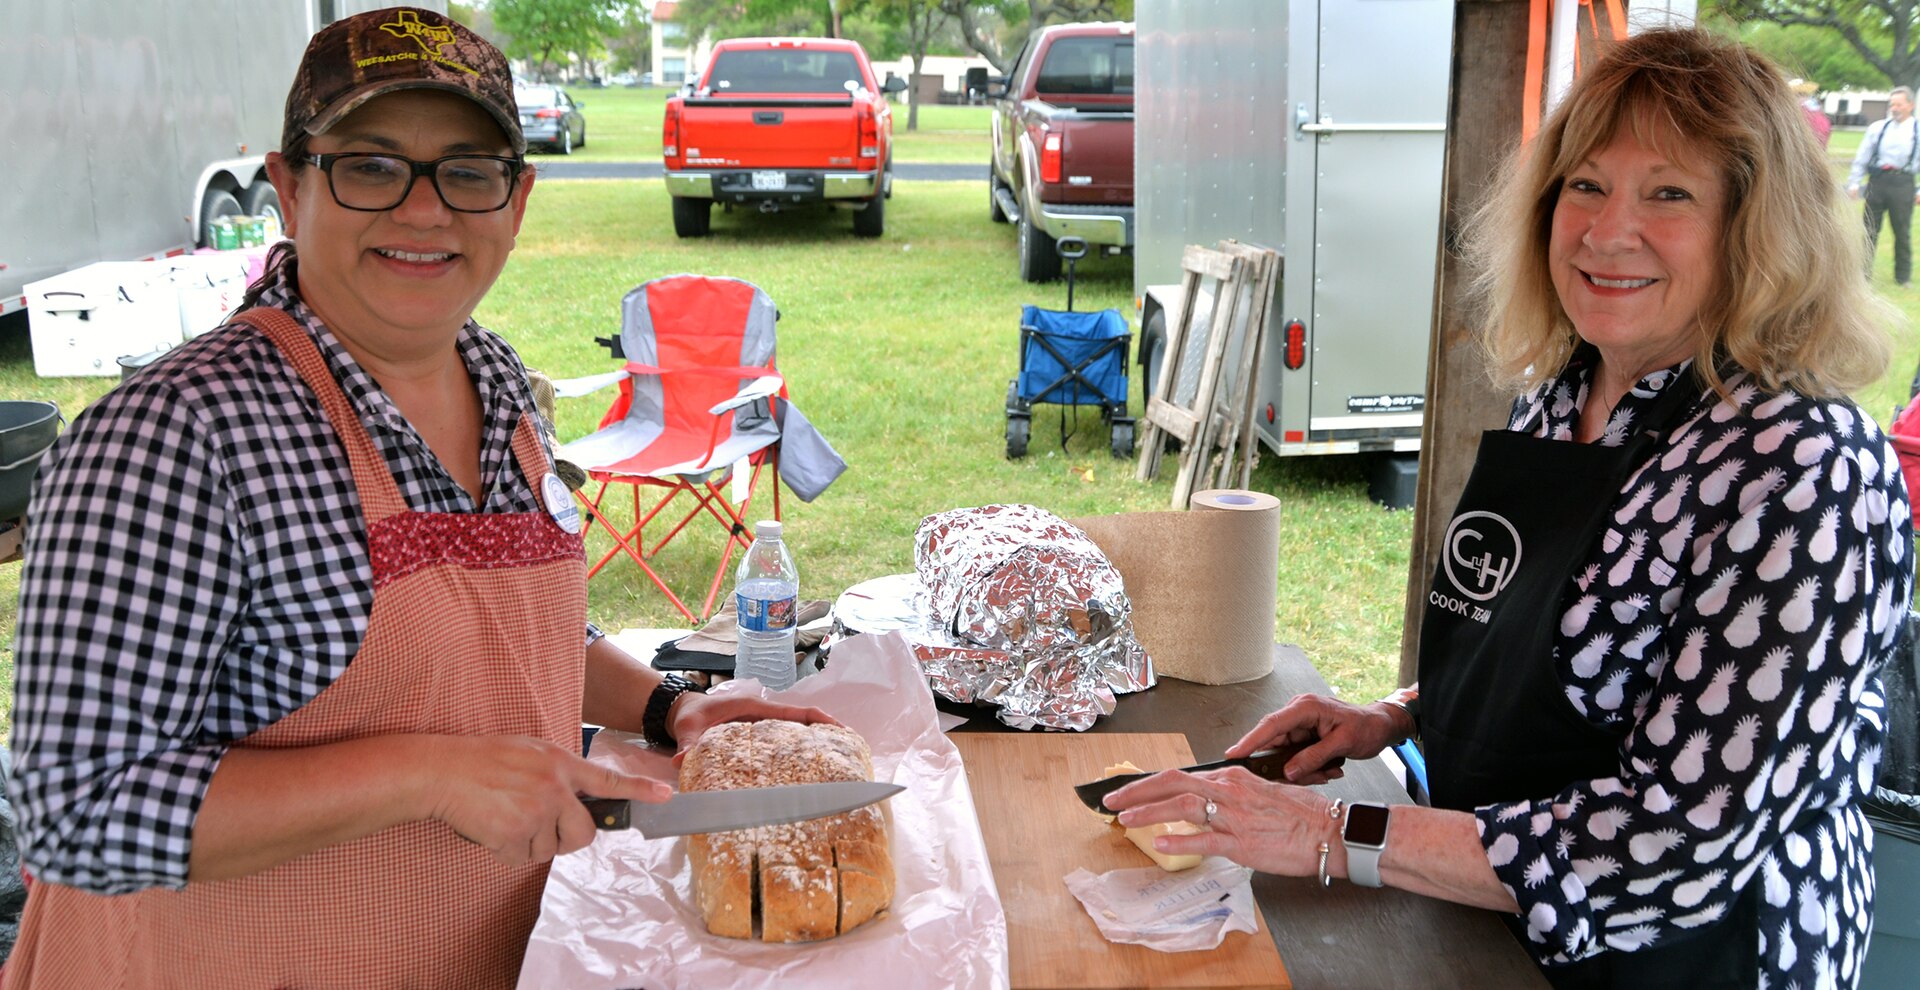 Claudia Villarreal (left) and Becky Bike (right) prepare oatmeal bread for the Ellis CW chuckwagon, out of Goliad, Texas, at the annual Cowboys for Heroes chuckwagon event at Joint Base San Antonio-Fort Sam Houston March 30.